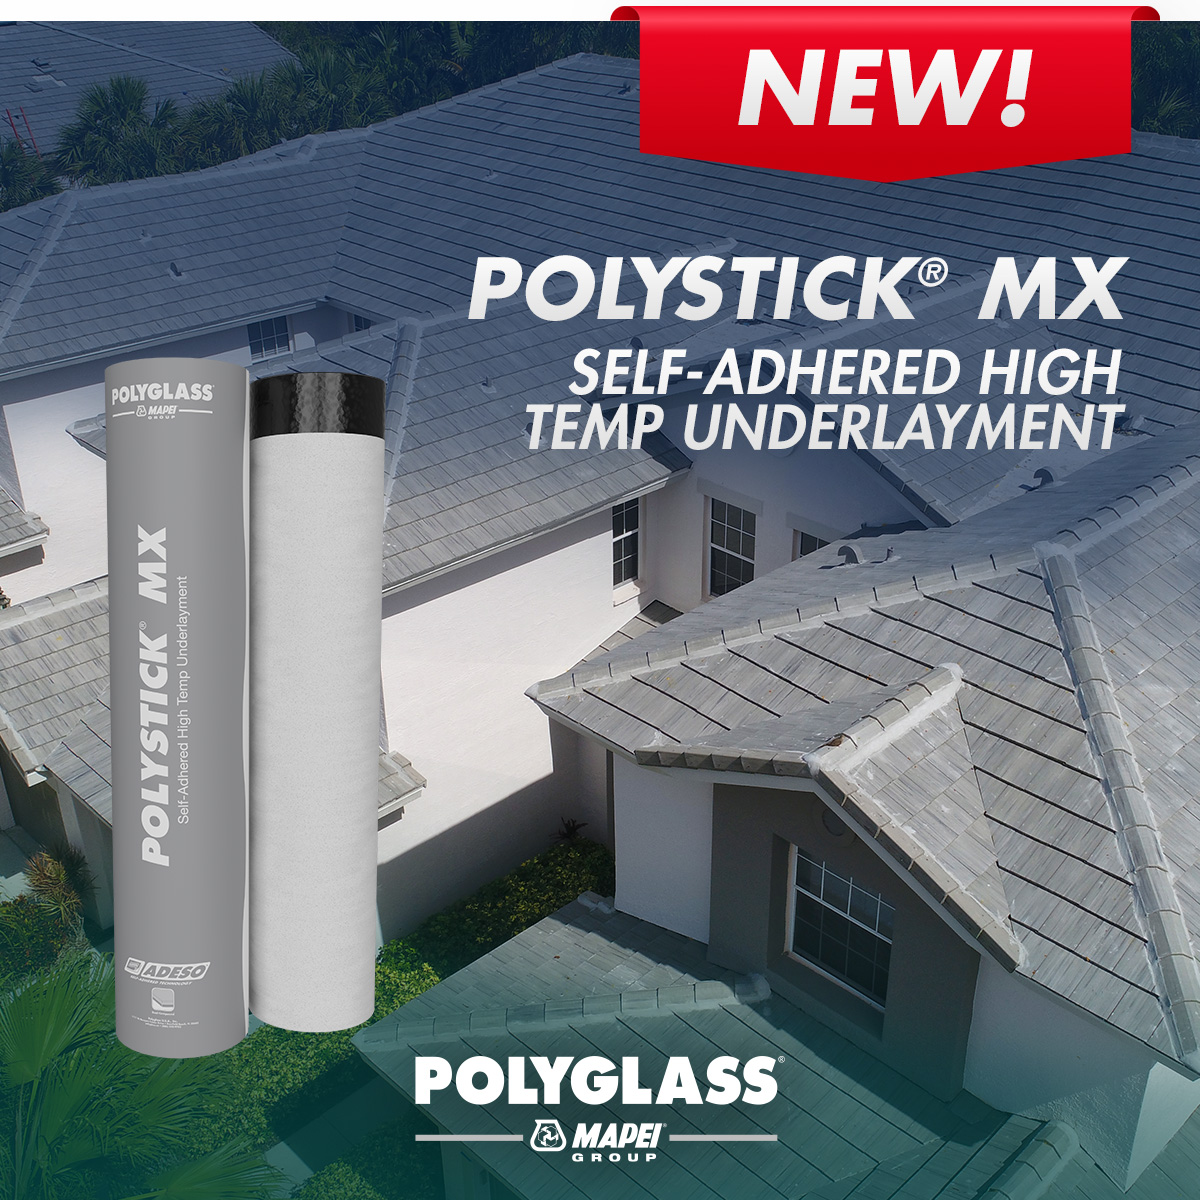 Polyglass Launches Polystick® MX – A Self-Adhered High Temp ...